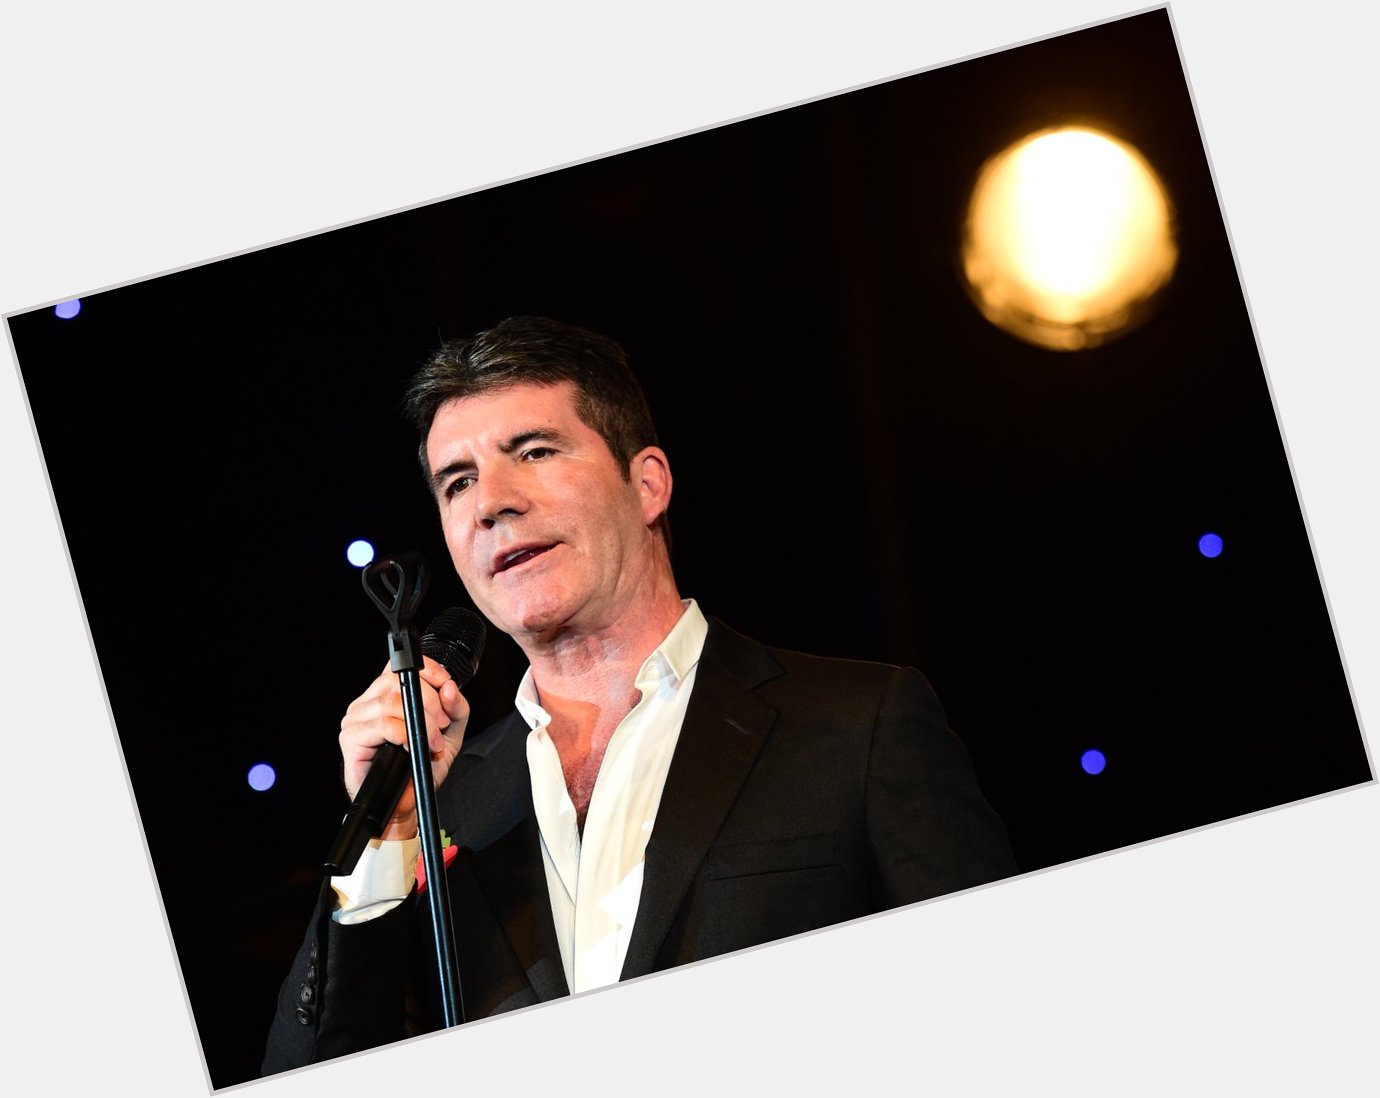 Happy Birthday Simon Cowell! Who is your favourite winner from one of his shows? 